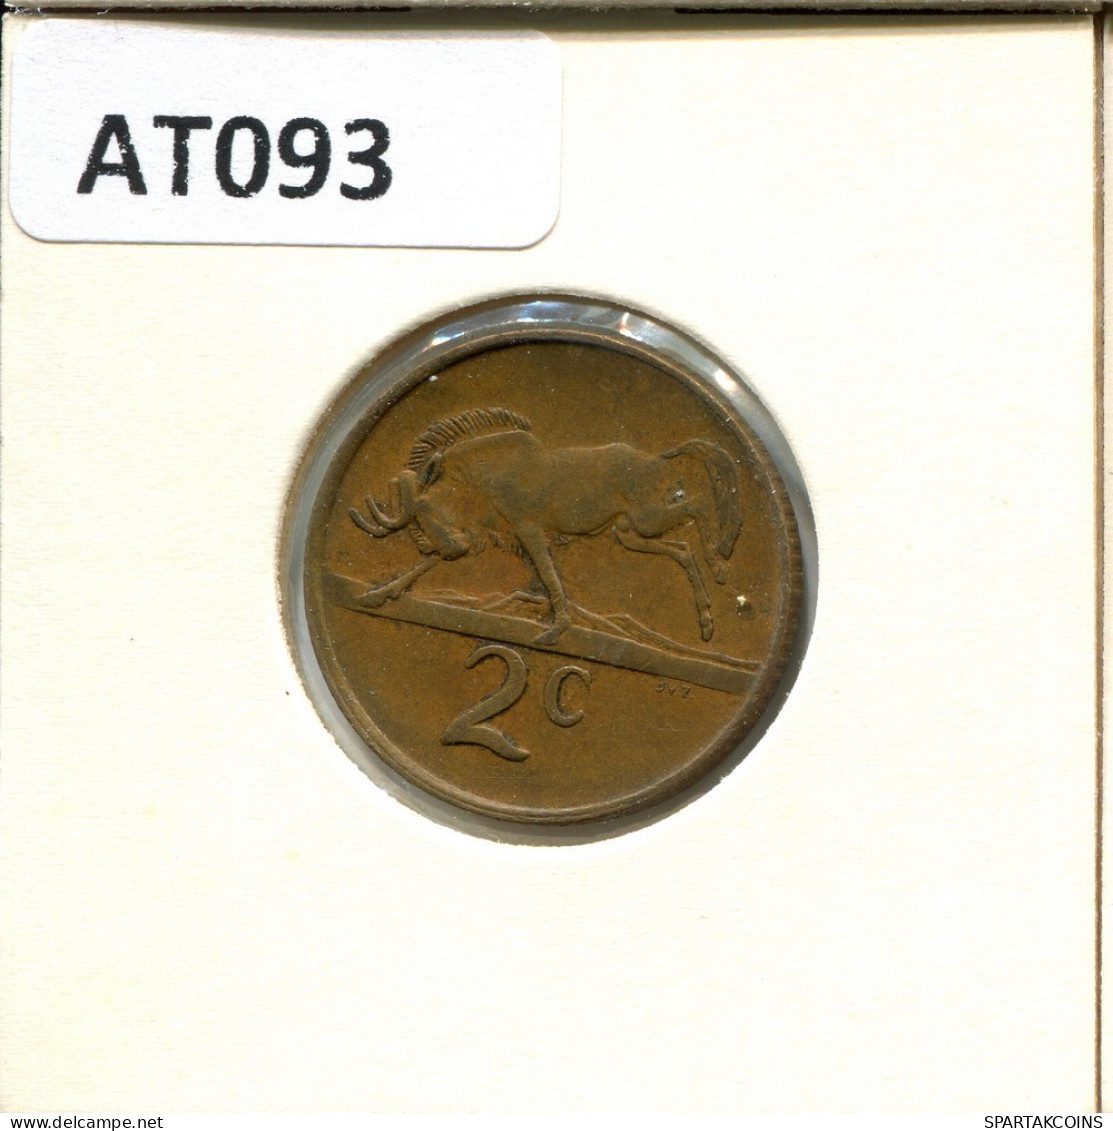 2 CENTS 1982 SOUTH AFRICA Coin #AT093.U.A - Sud Africa